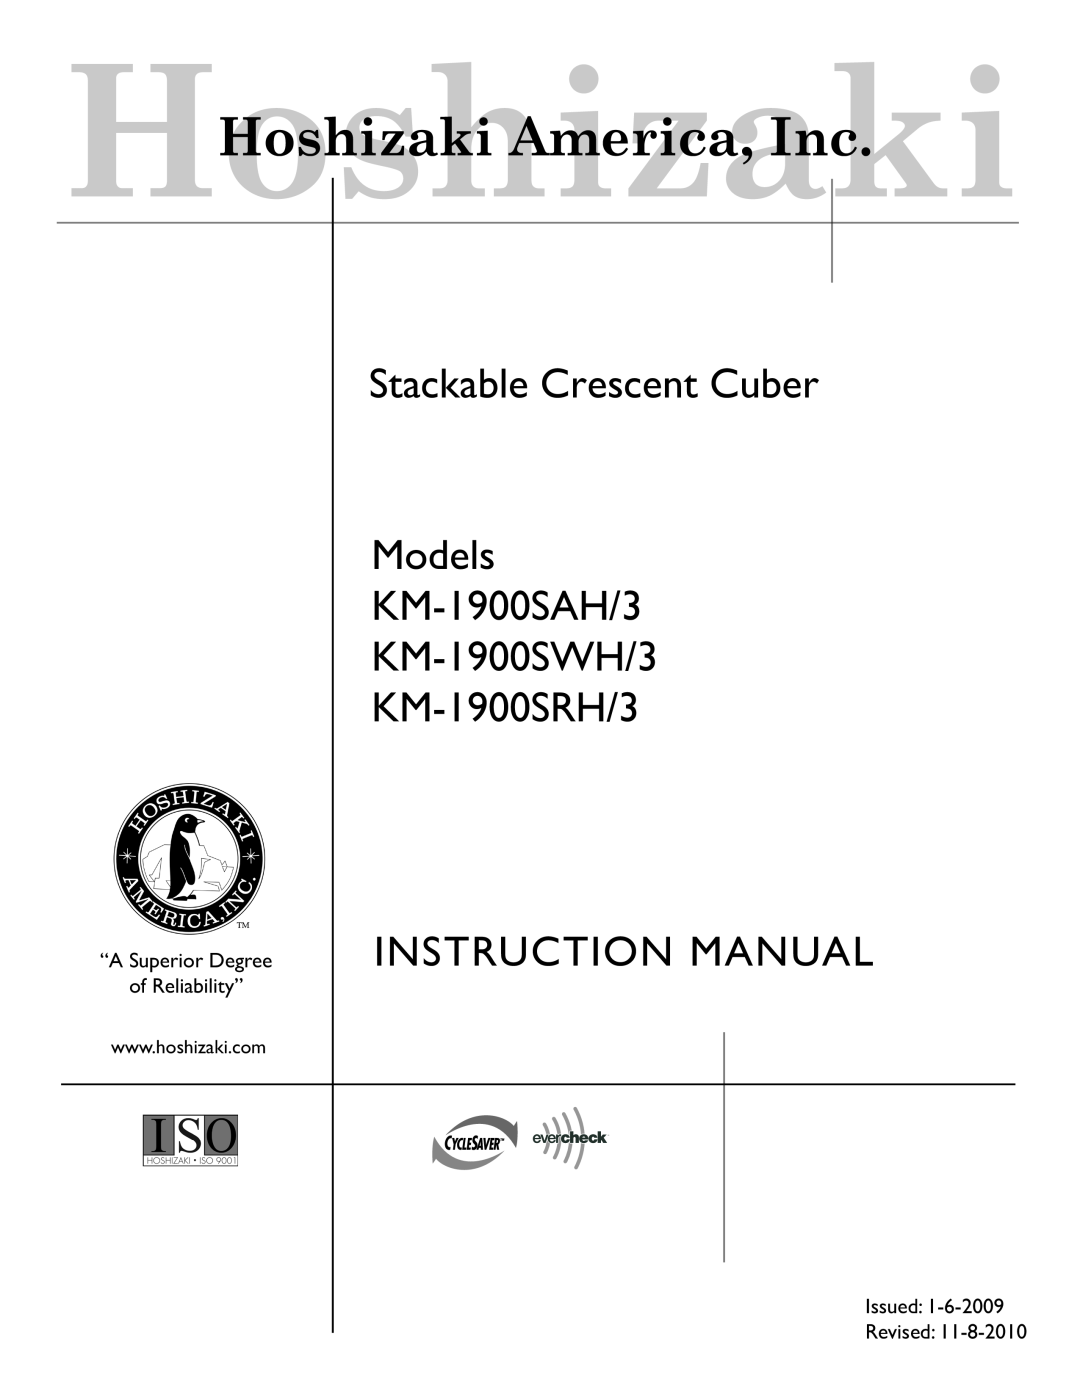 Hoshizaki instruction manual Stackable Crescent Cuber Models KM-1900SAH/3, KM-1900SWH/3 KM-1900SRH/3, Issued Revised 